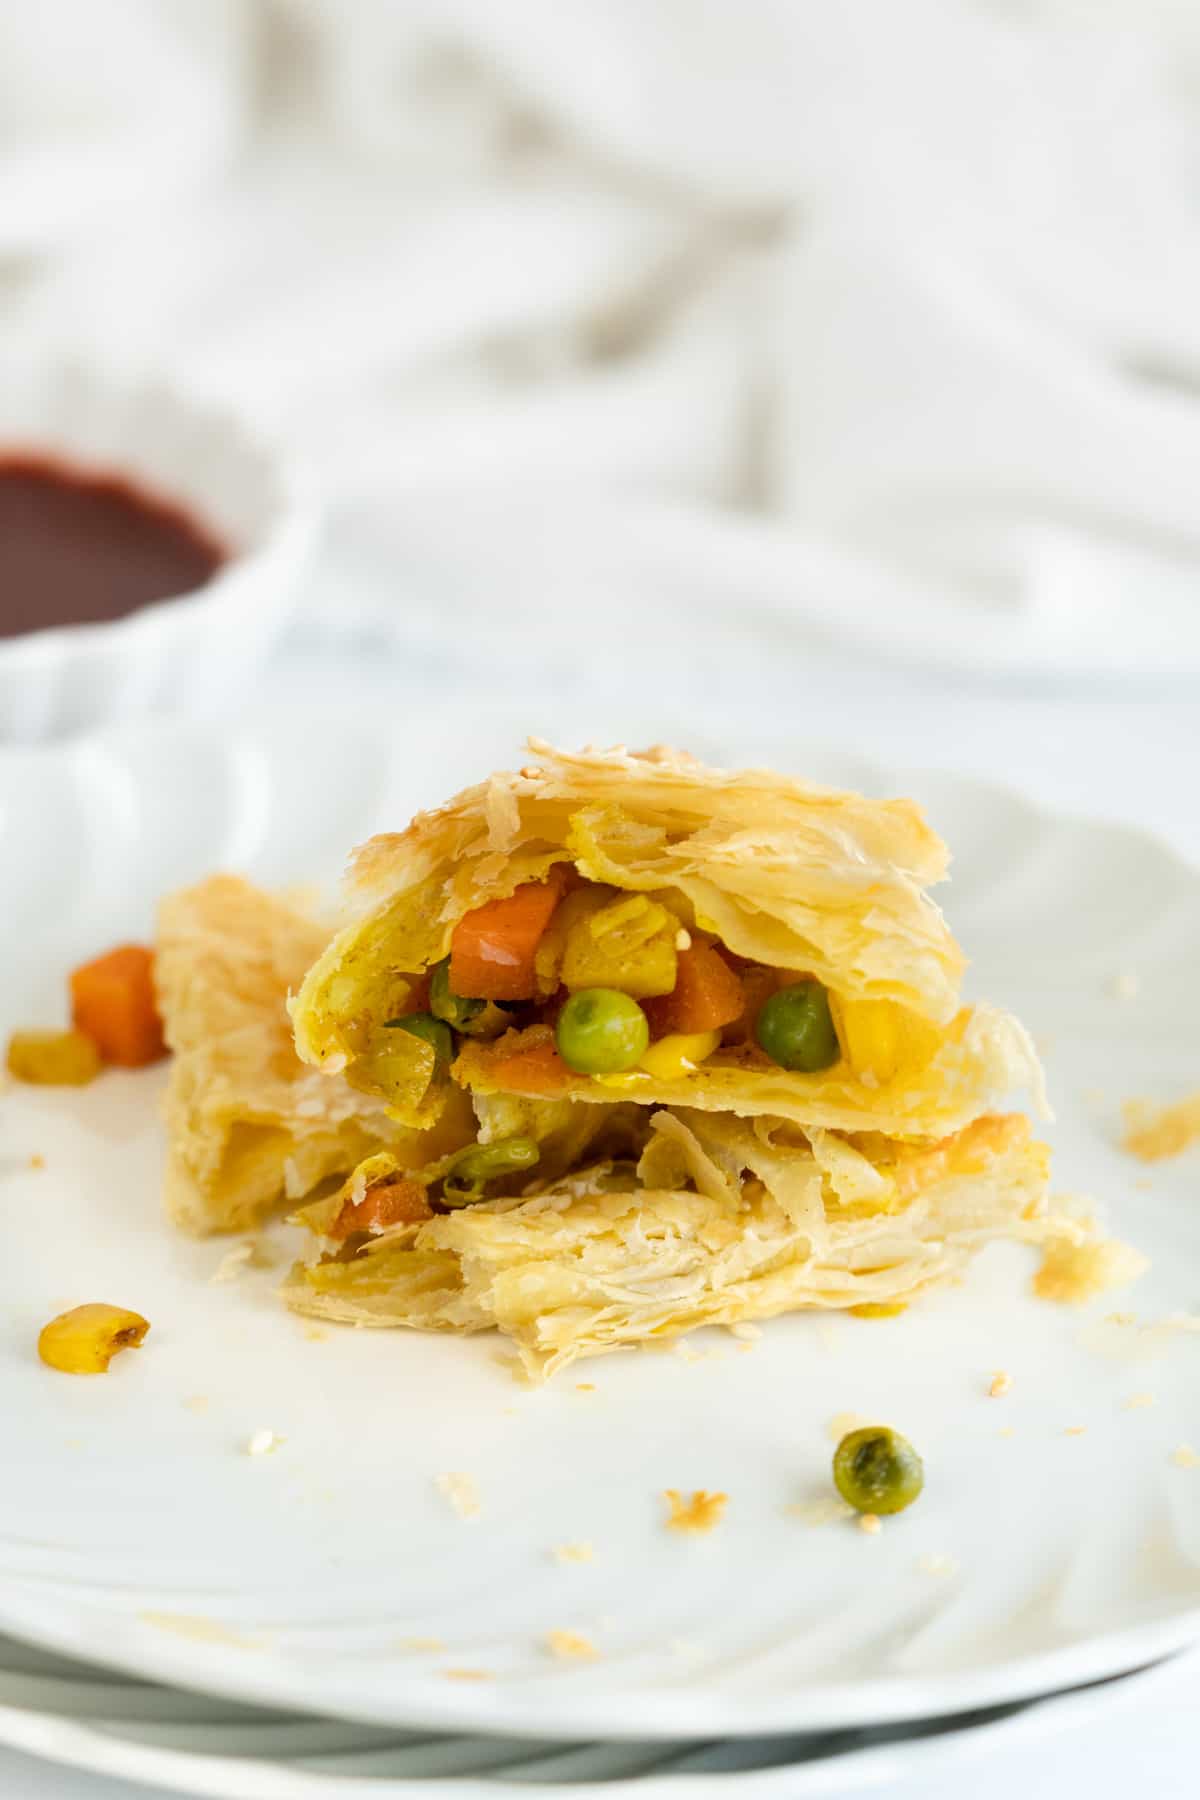 a torn pastry with the vegetable filling showing